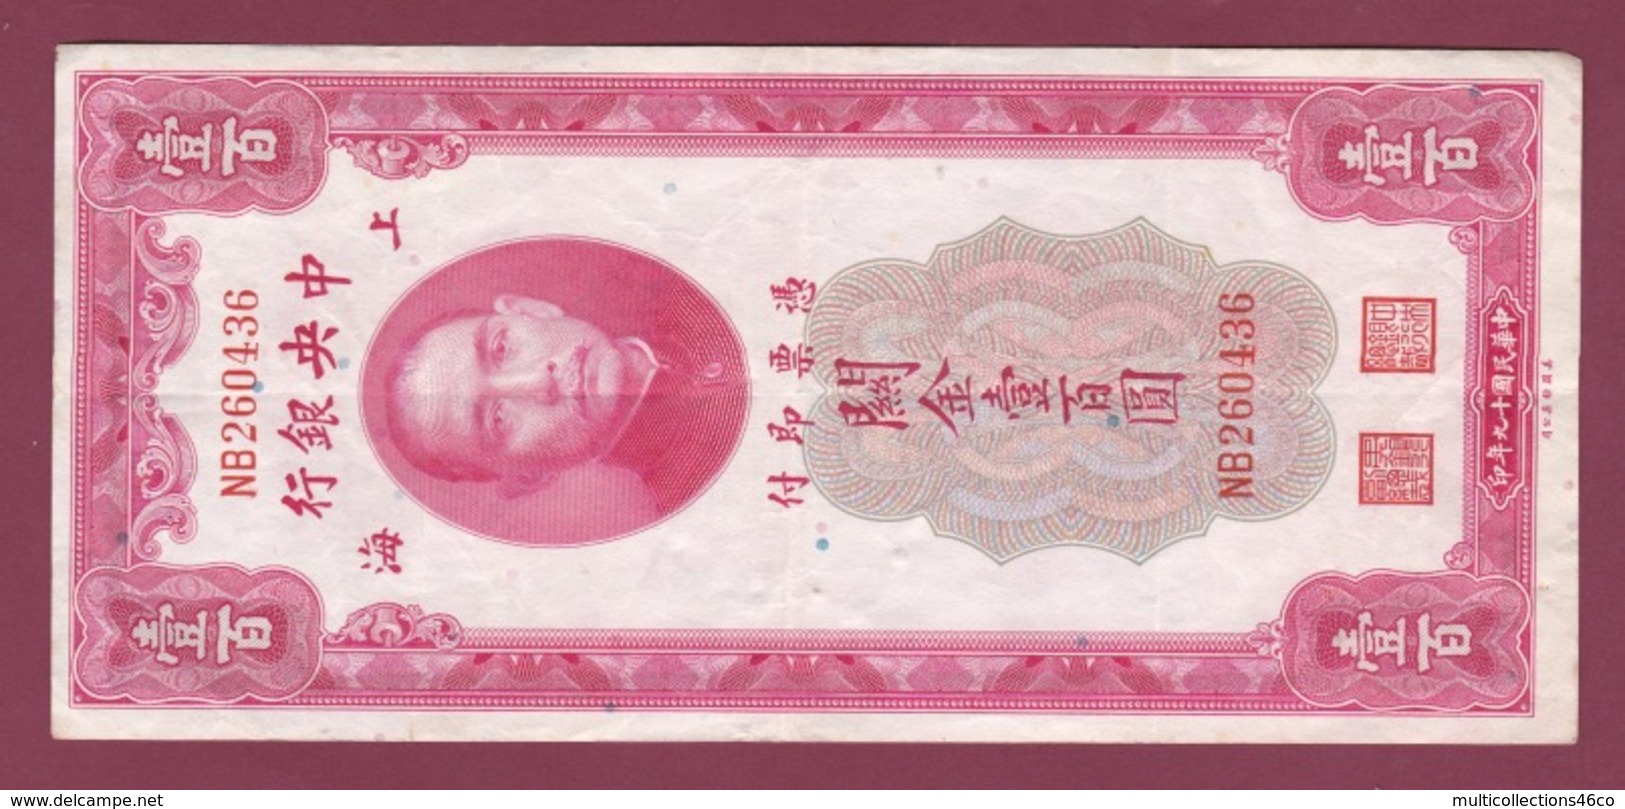 100619A - BILLET ASIE CHINE The Central Bank Of China 100 Shanghai 1930 One Hundred Customs Gold Units NB260436 - China